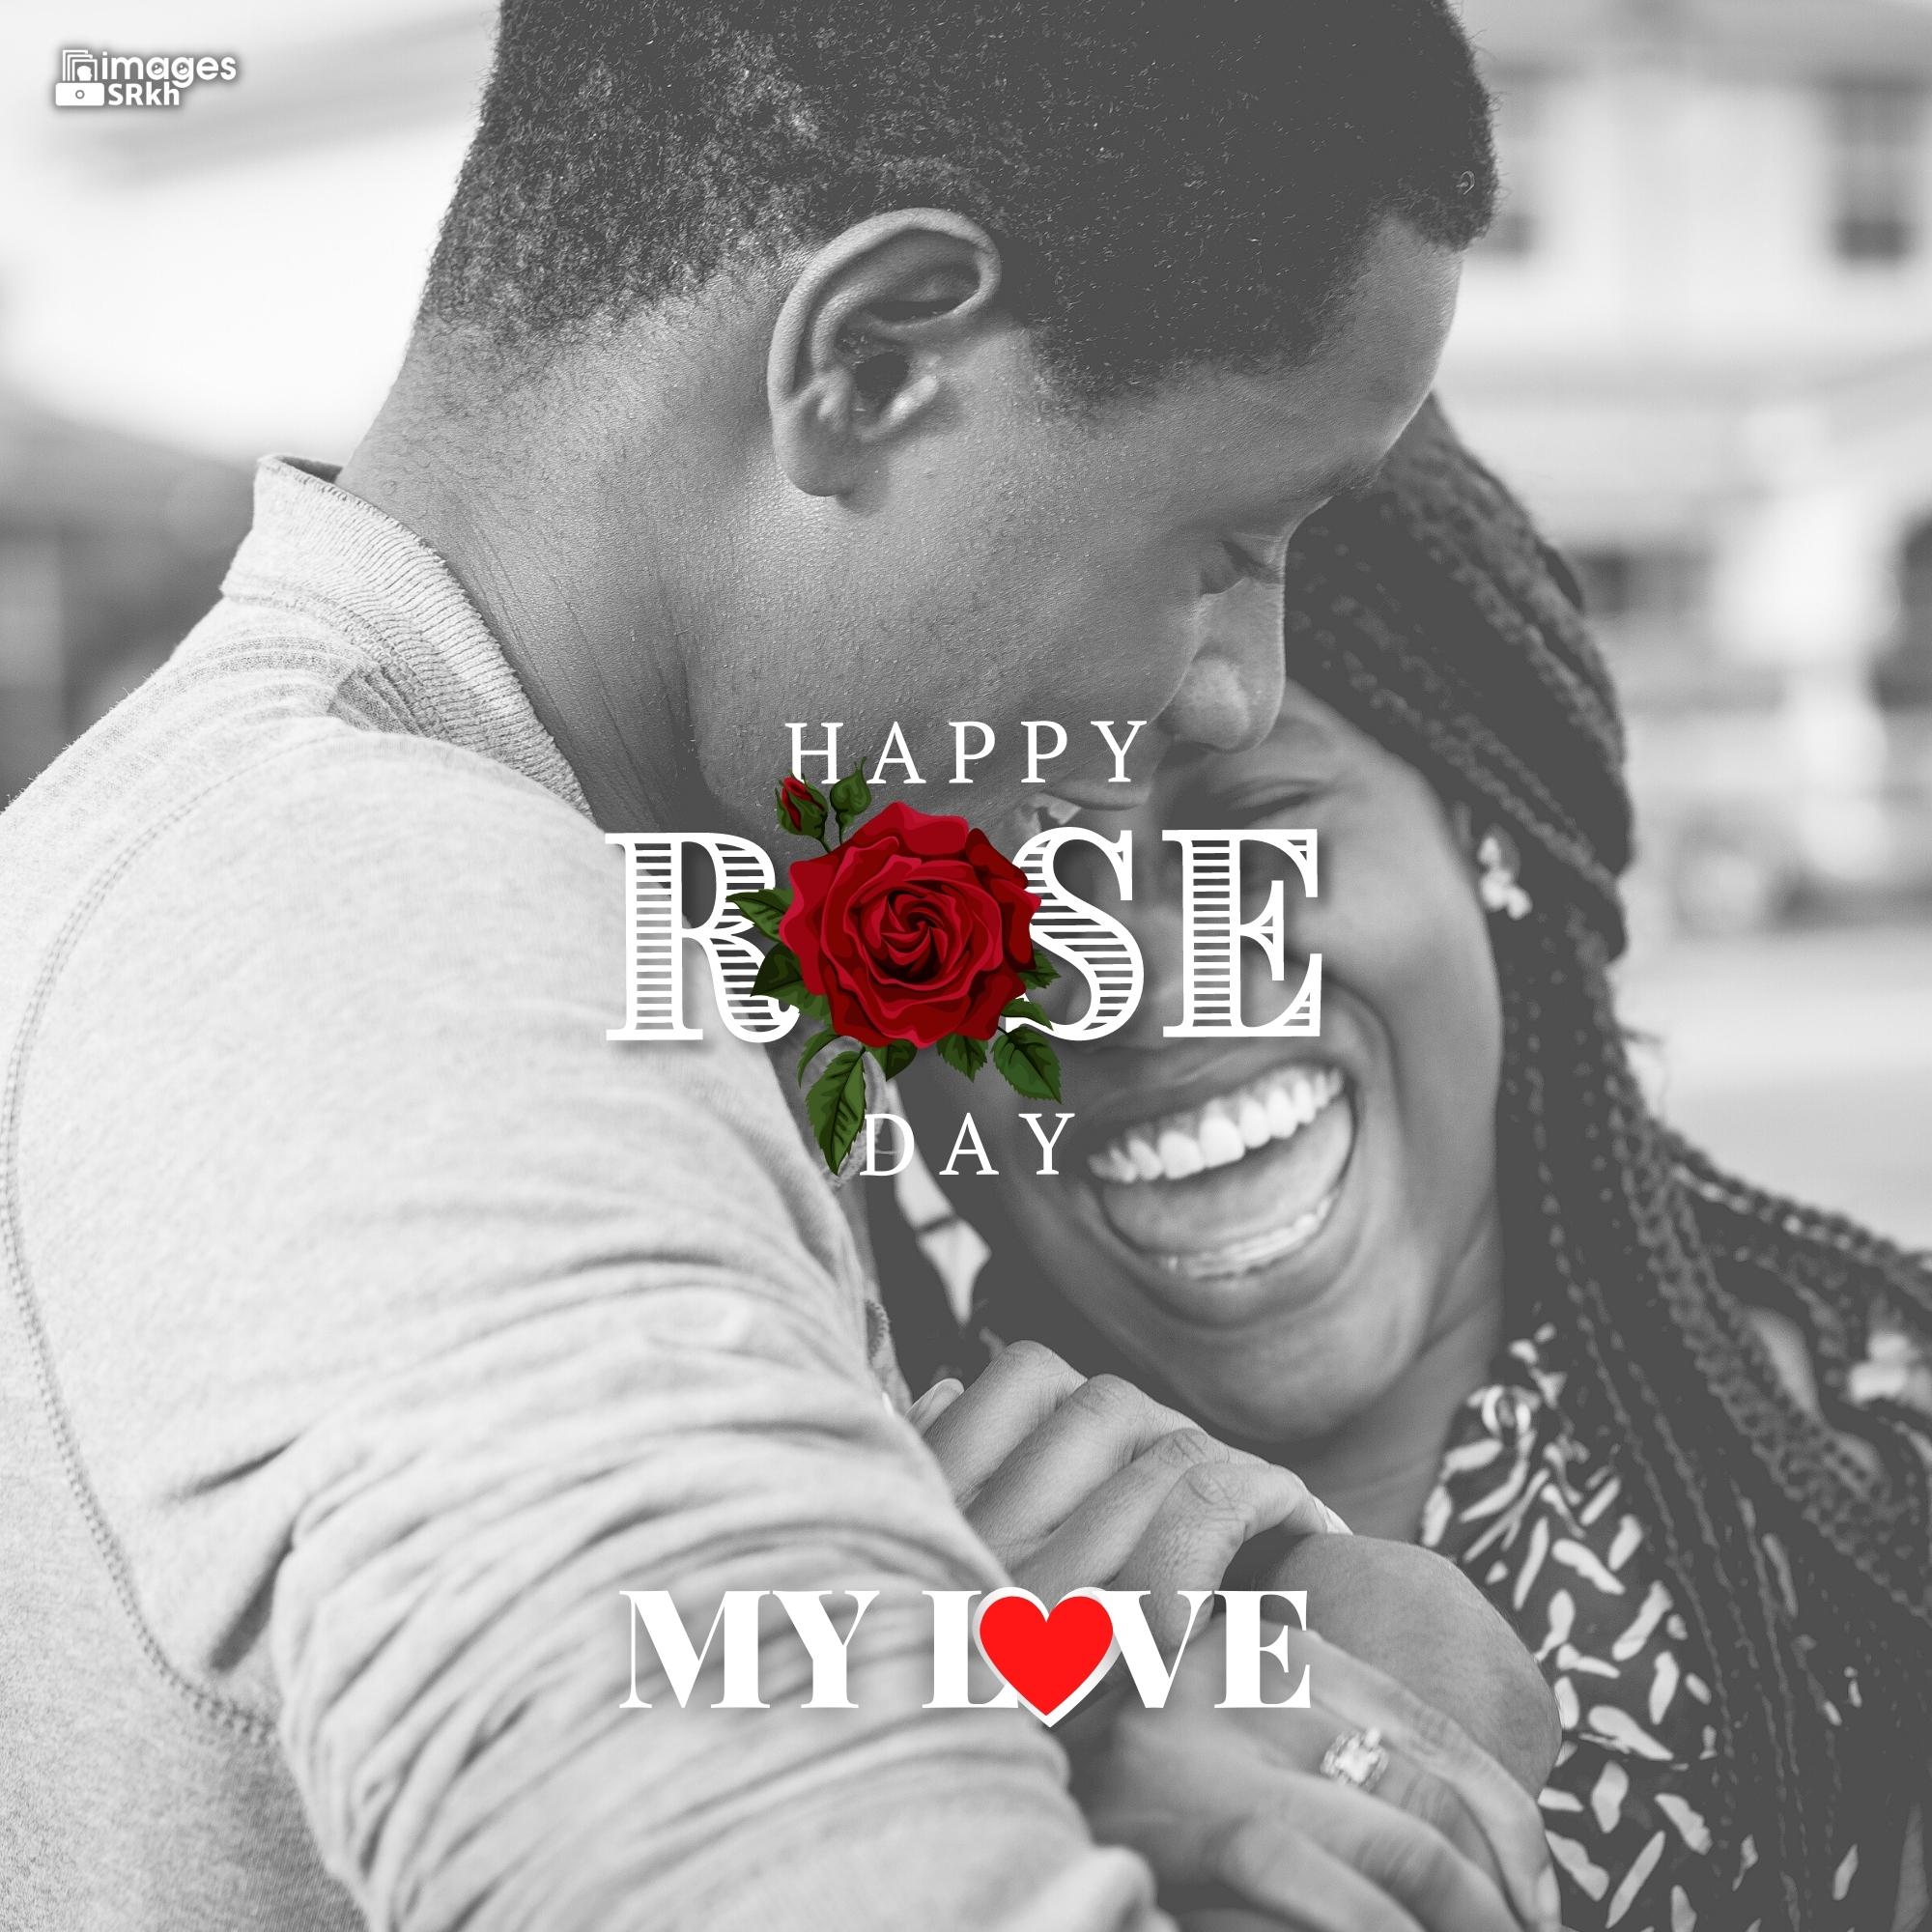 Happy Rose Day My Love (15) | HD IMAGES